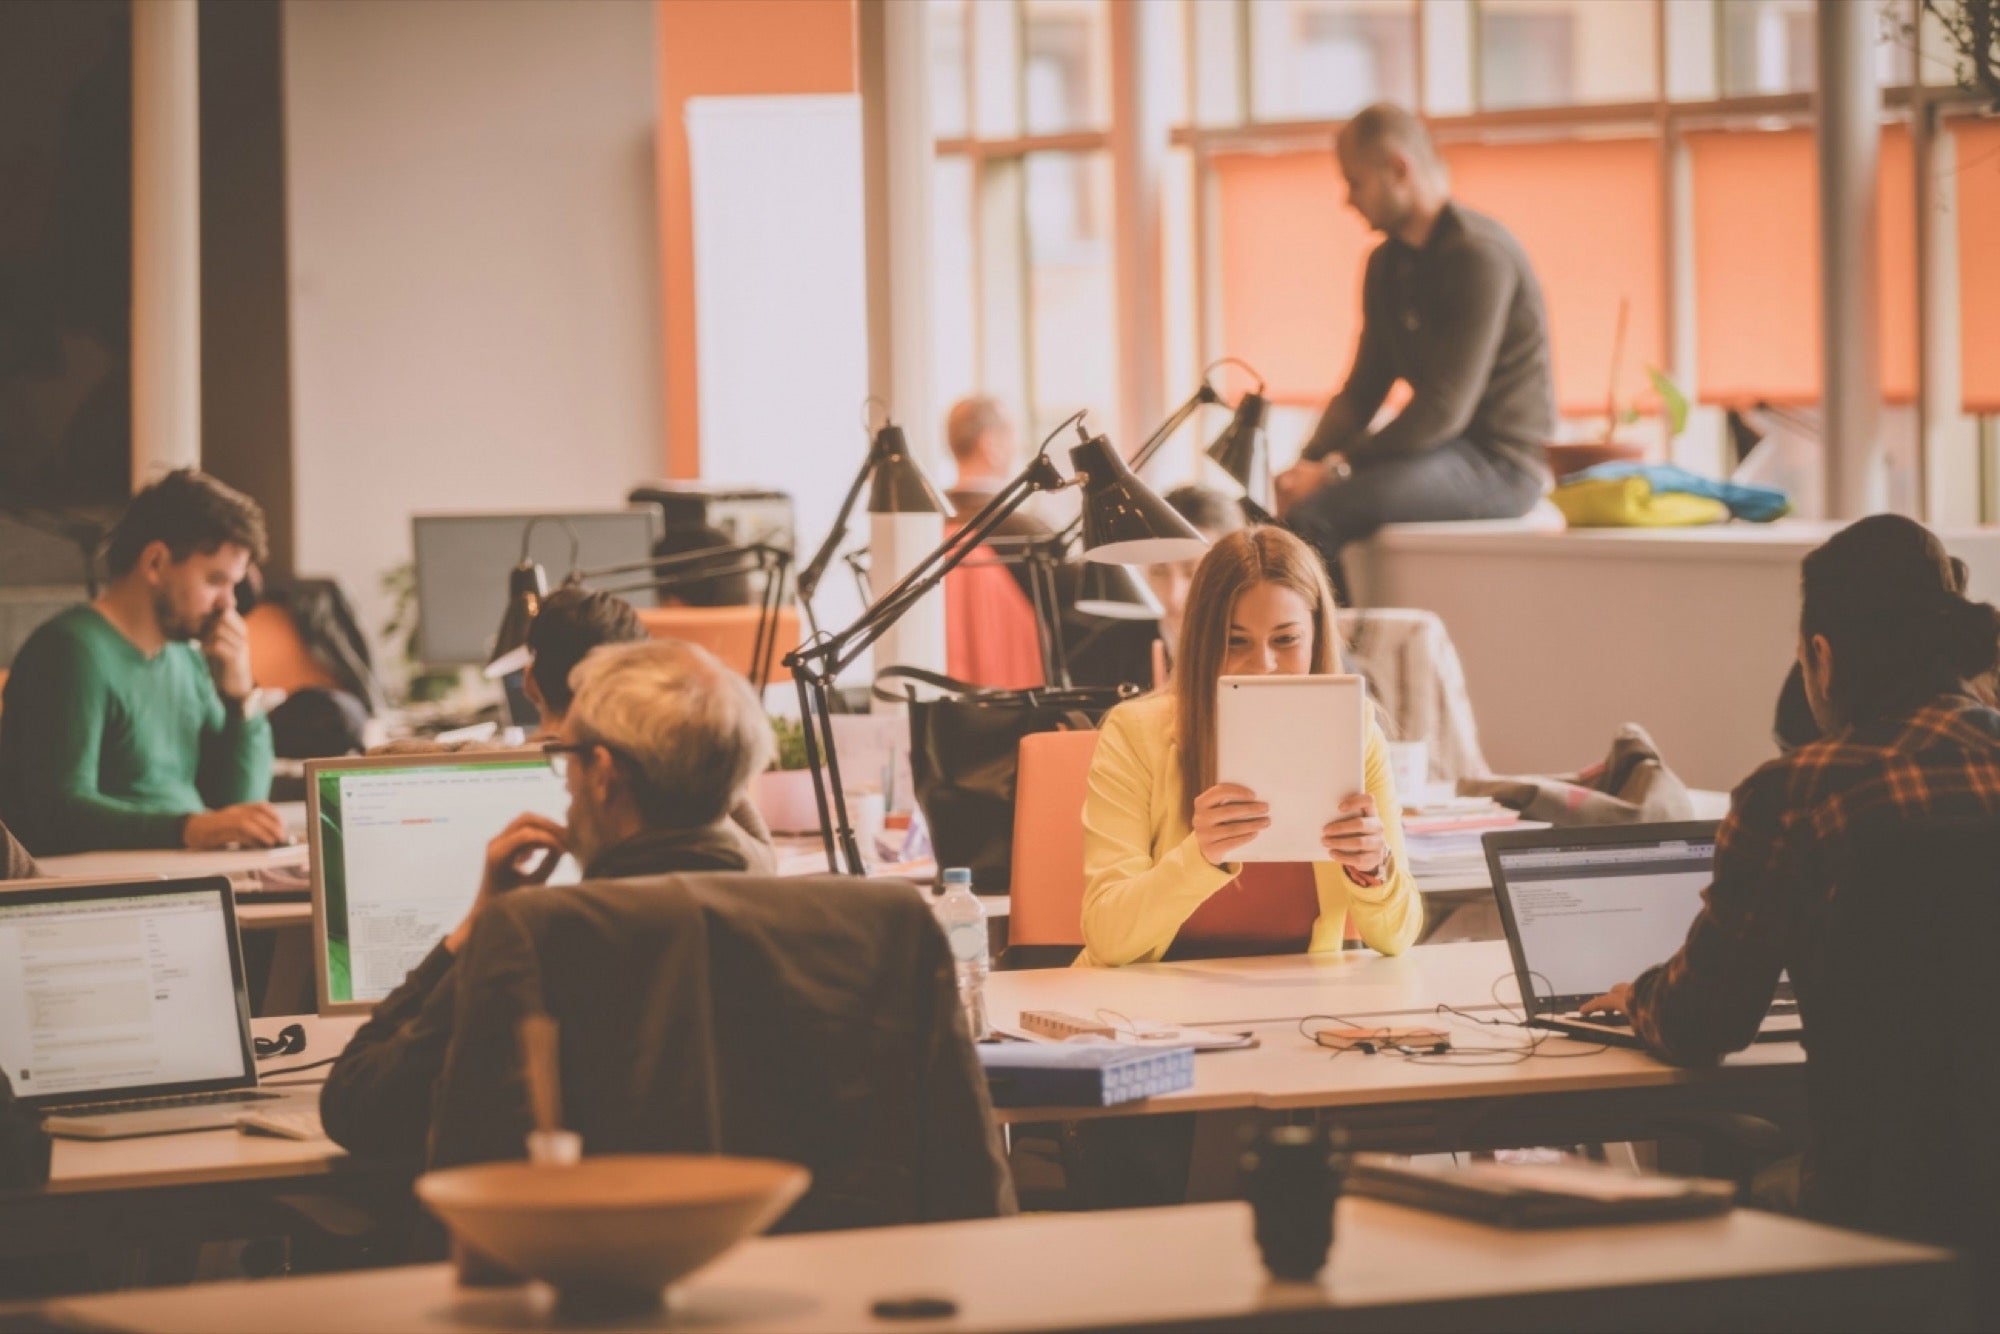 Is Co-working Spaces Can Be Profitable Businesses, And How?